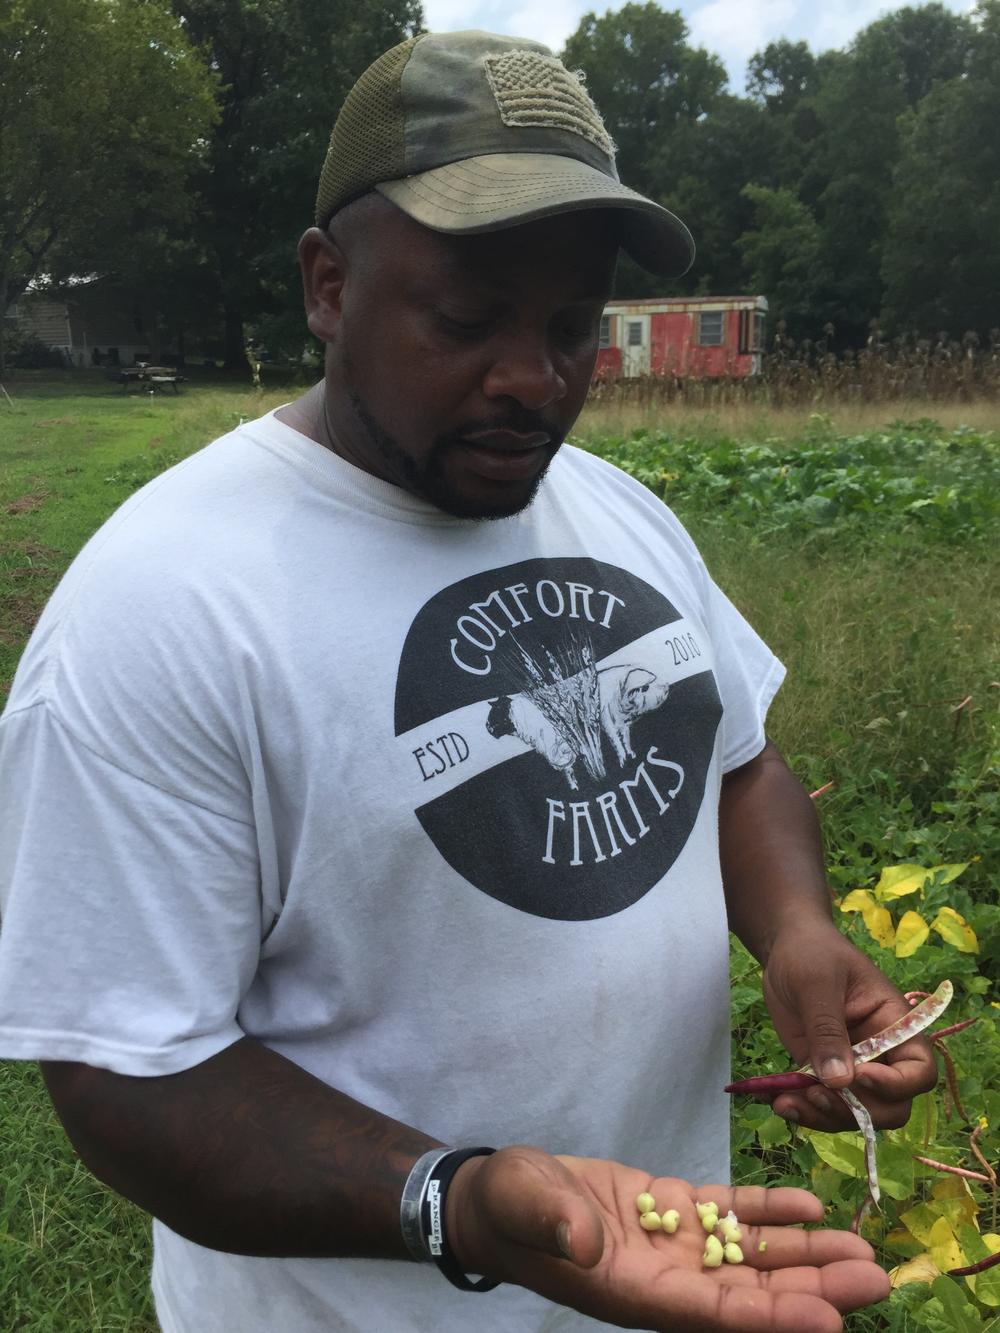 Jon Jackson, a veteran of the wars in Iraq and Afghanistan, tends to his farm in Milledgeville, Georgia. He has been introducing other vets to farming to combat the emotional and physical scars of war.